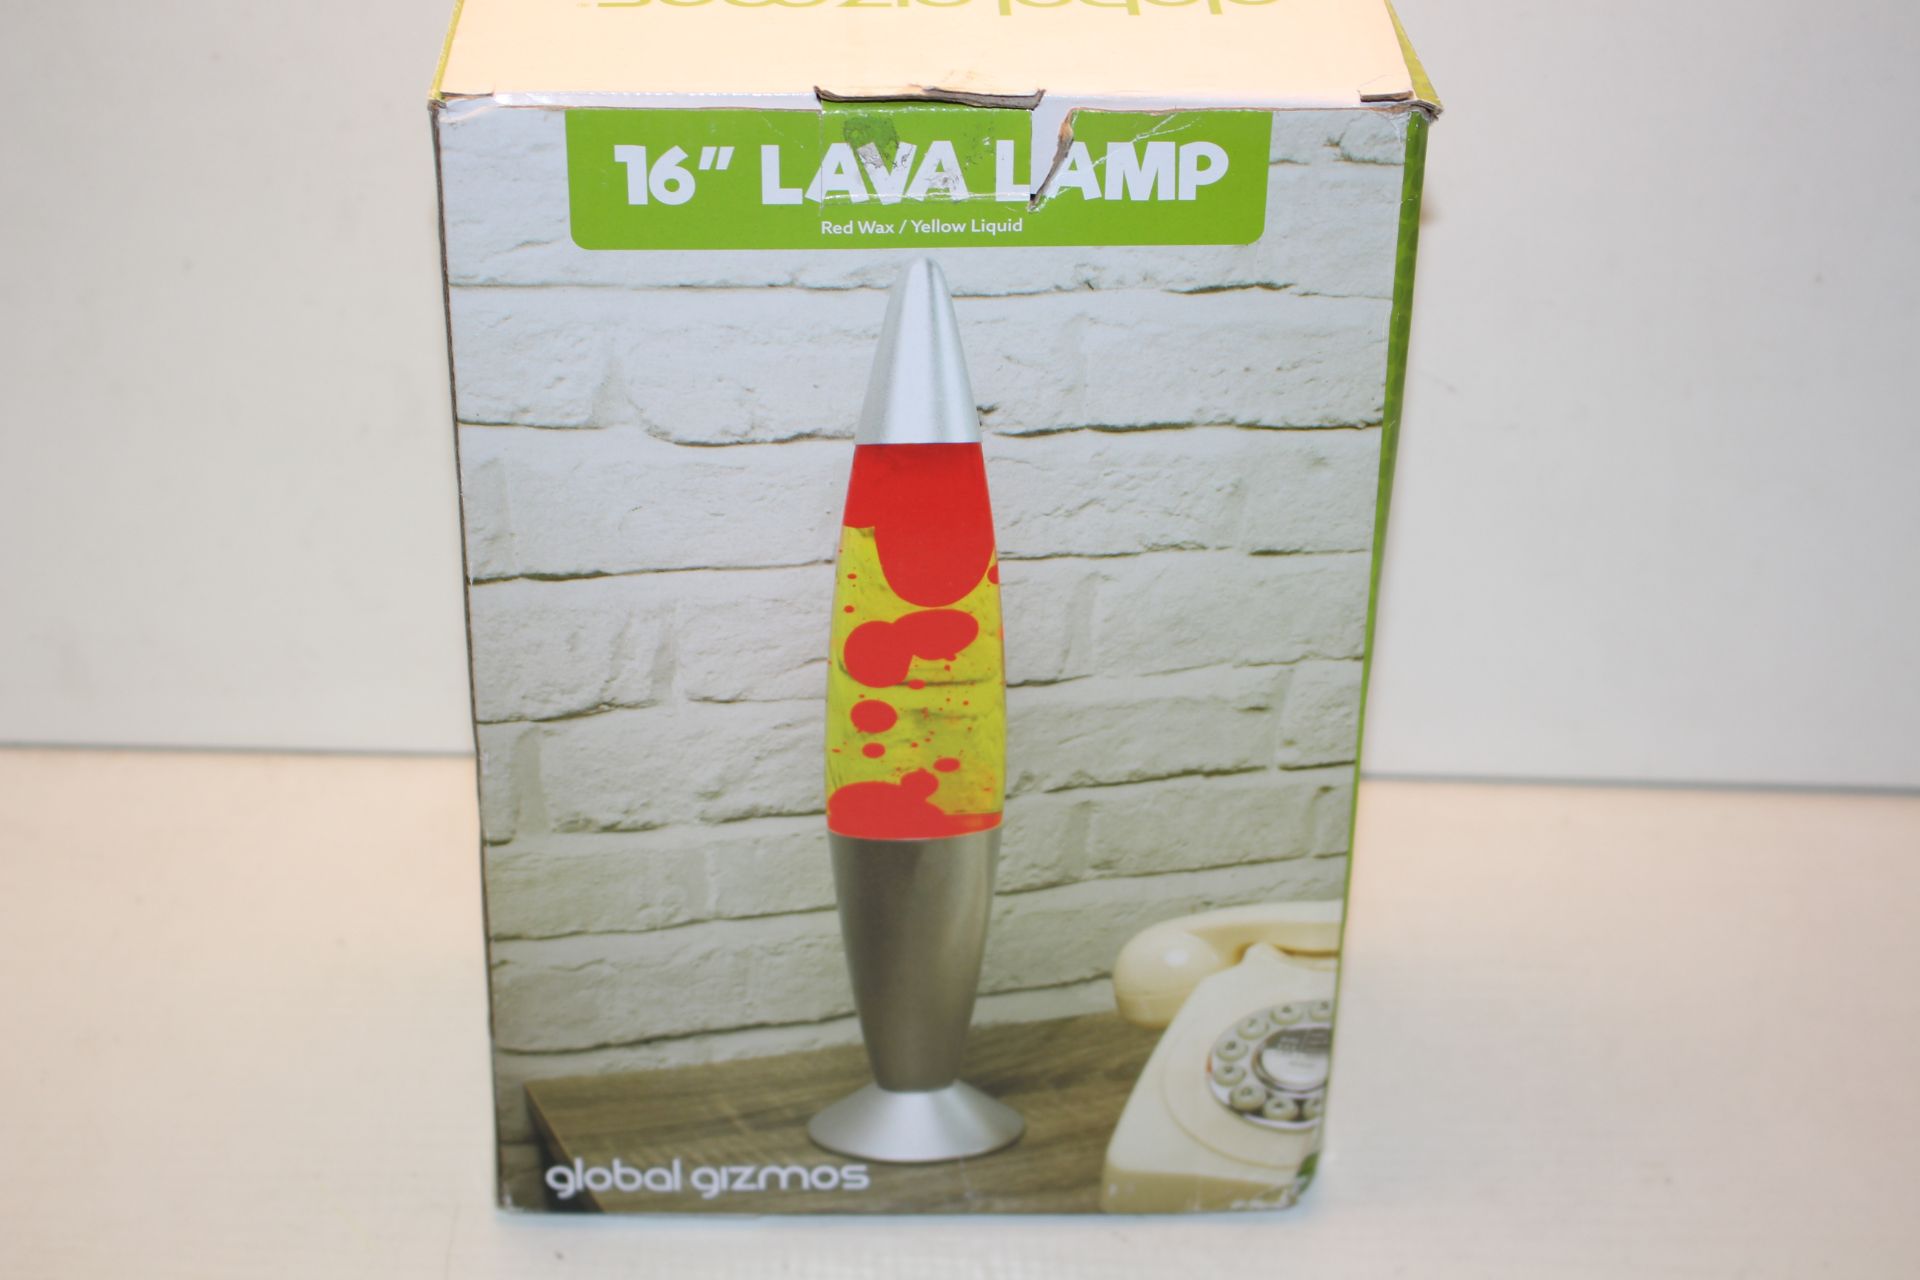 BOXED GLOBAL GIZMOS 16" LAVA LAMP Condition ReportAppraisal Available on Request- All Items are